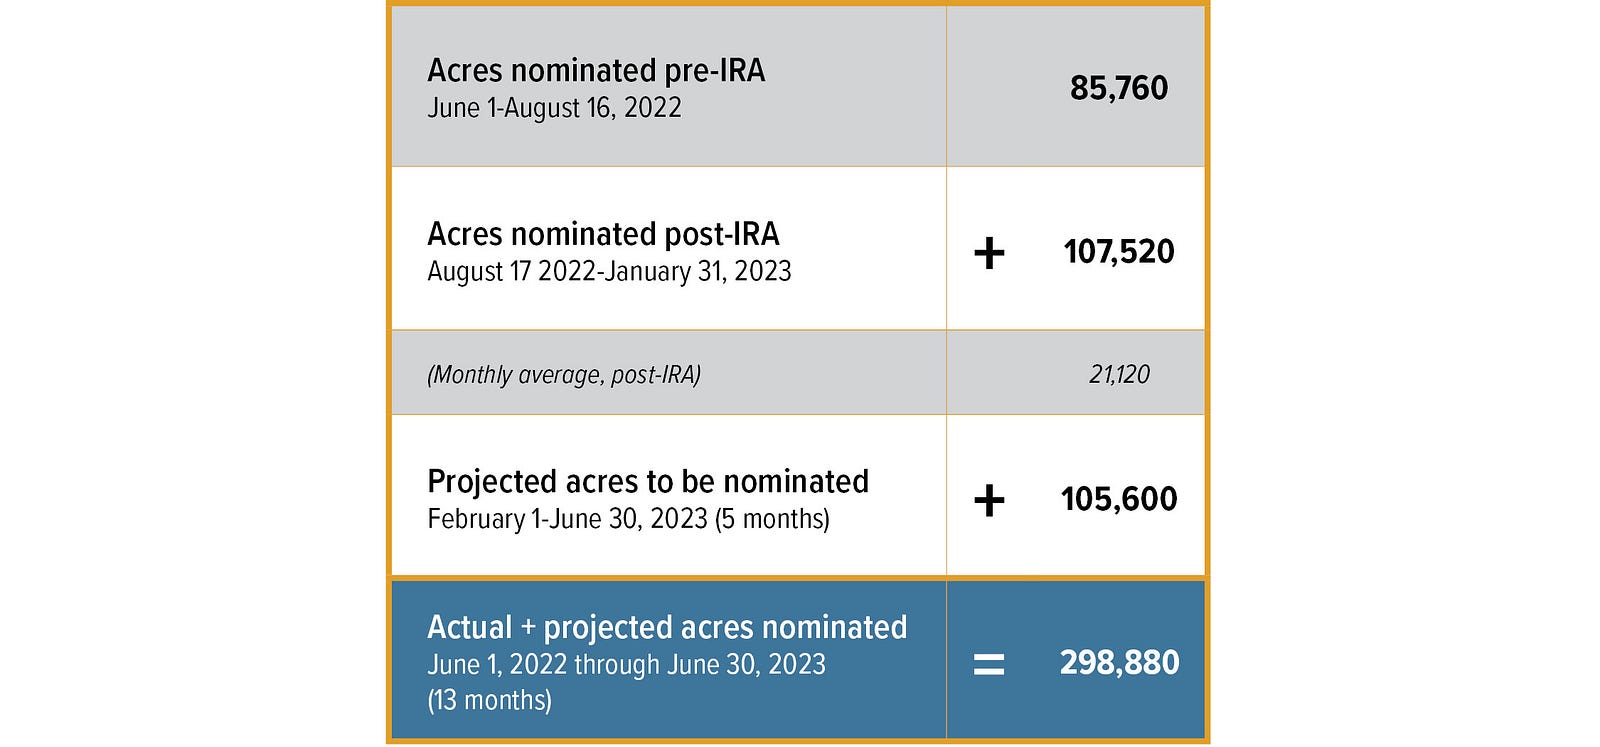 Acres nominated pre-IRA, June 1-August 16, 2022: 85,760 + Acres nominated post-IRA, August 17, 2022-January 31, 2023: 107,520 (Monthly average, post-IRA): 21,120 + Projected acres to be nominated, February 1-June 30, 2023 (5 months): 105,600 = Actual + projected acres nominated, June 1, 2022 through June 30, 2023 (13 months): 298,880